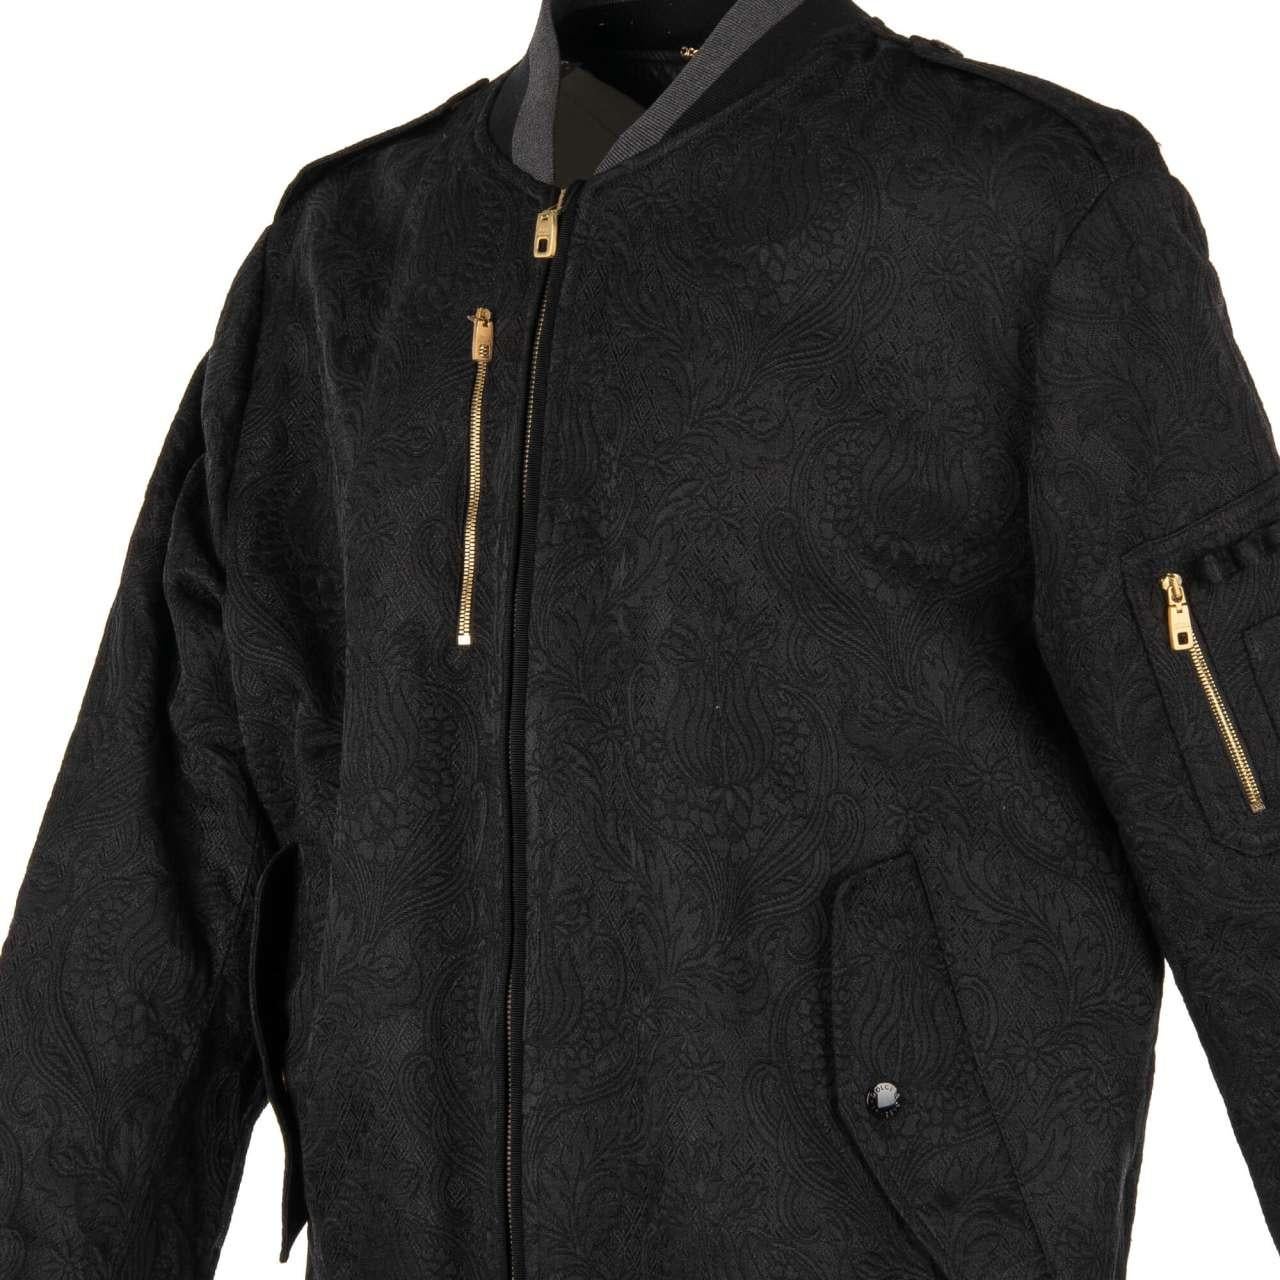 Dolce & Gabbana Brocade Bomber Jacket with Zip Closure and Pockets Black 56 For Sale 1